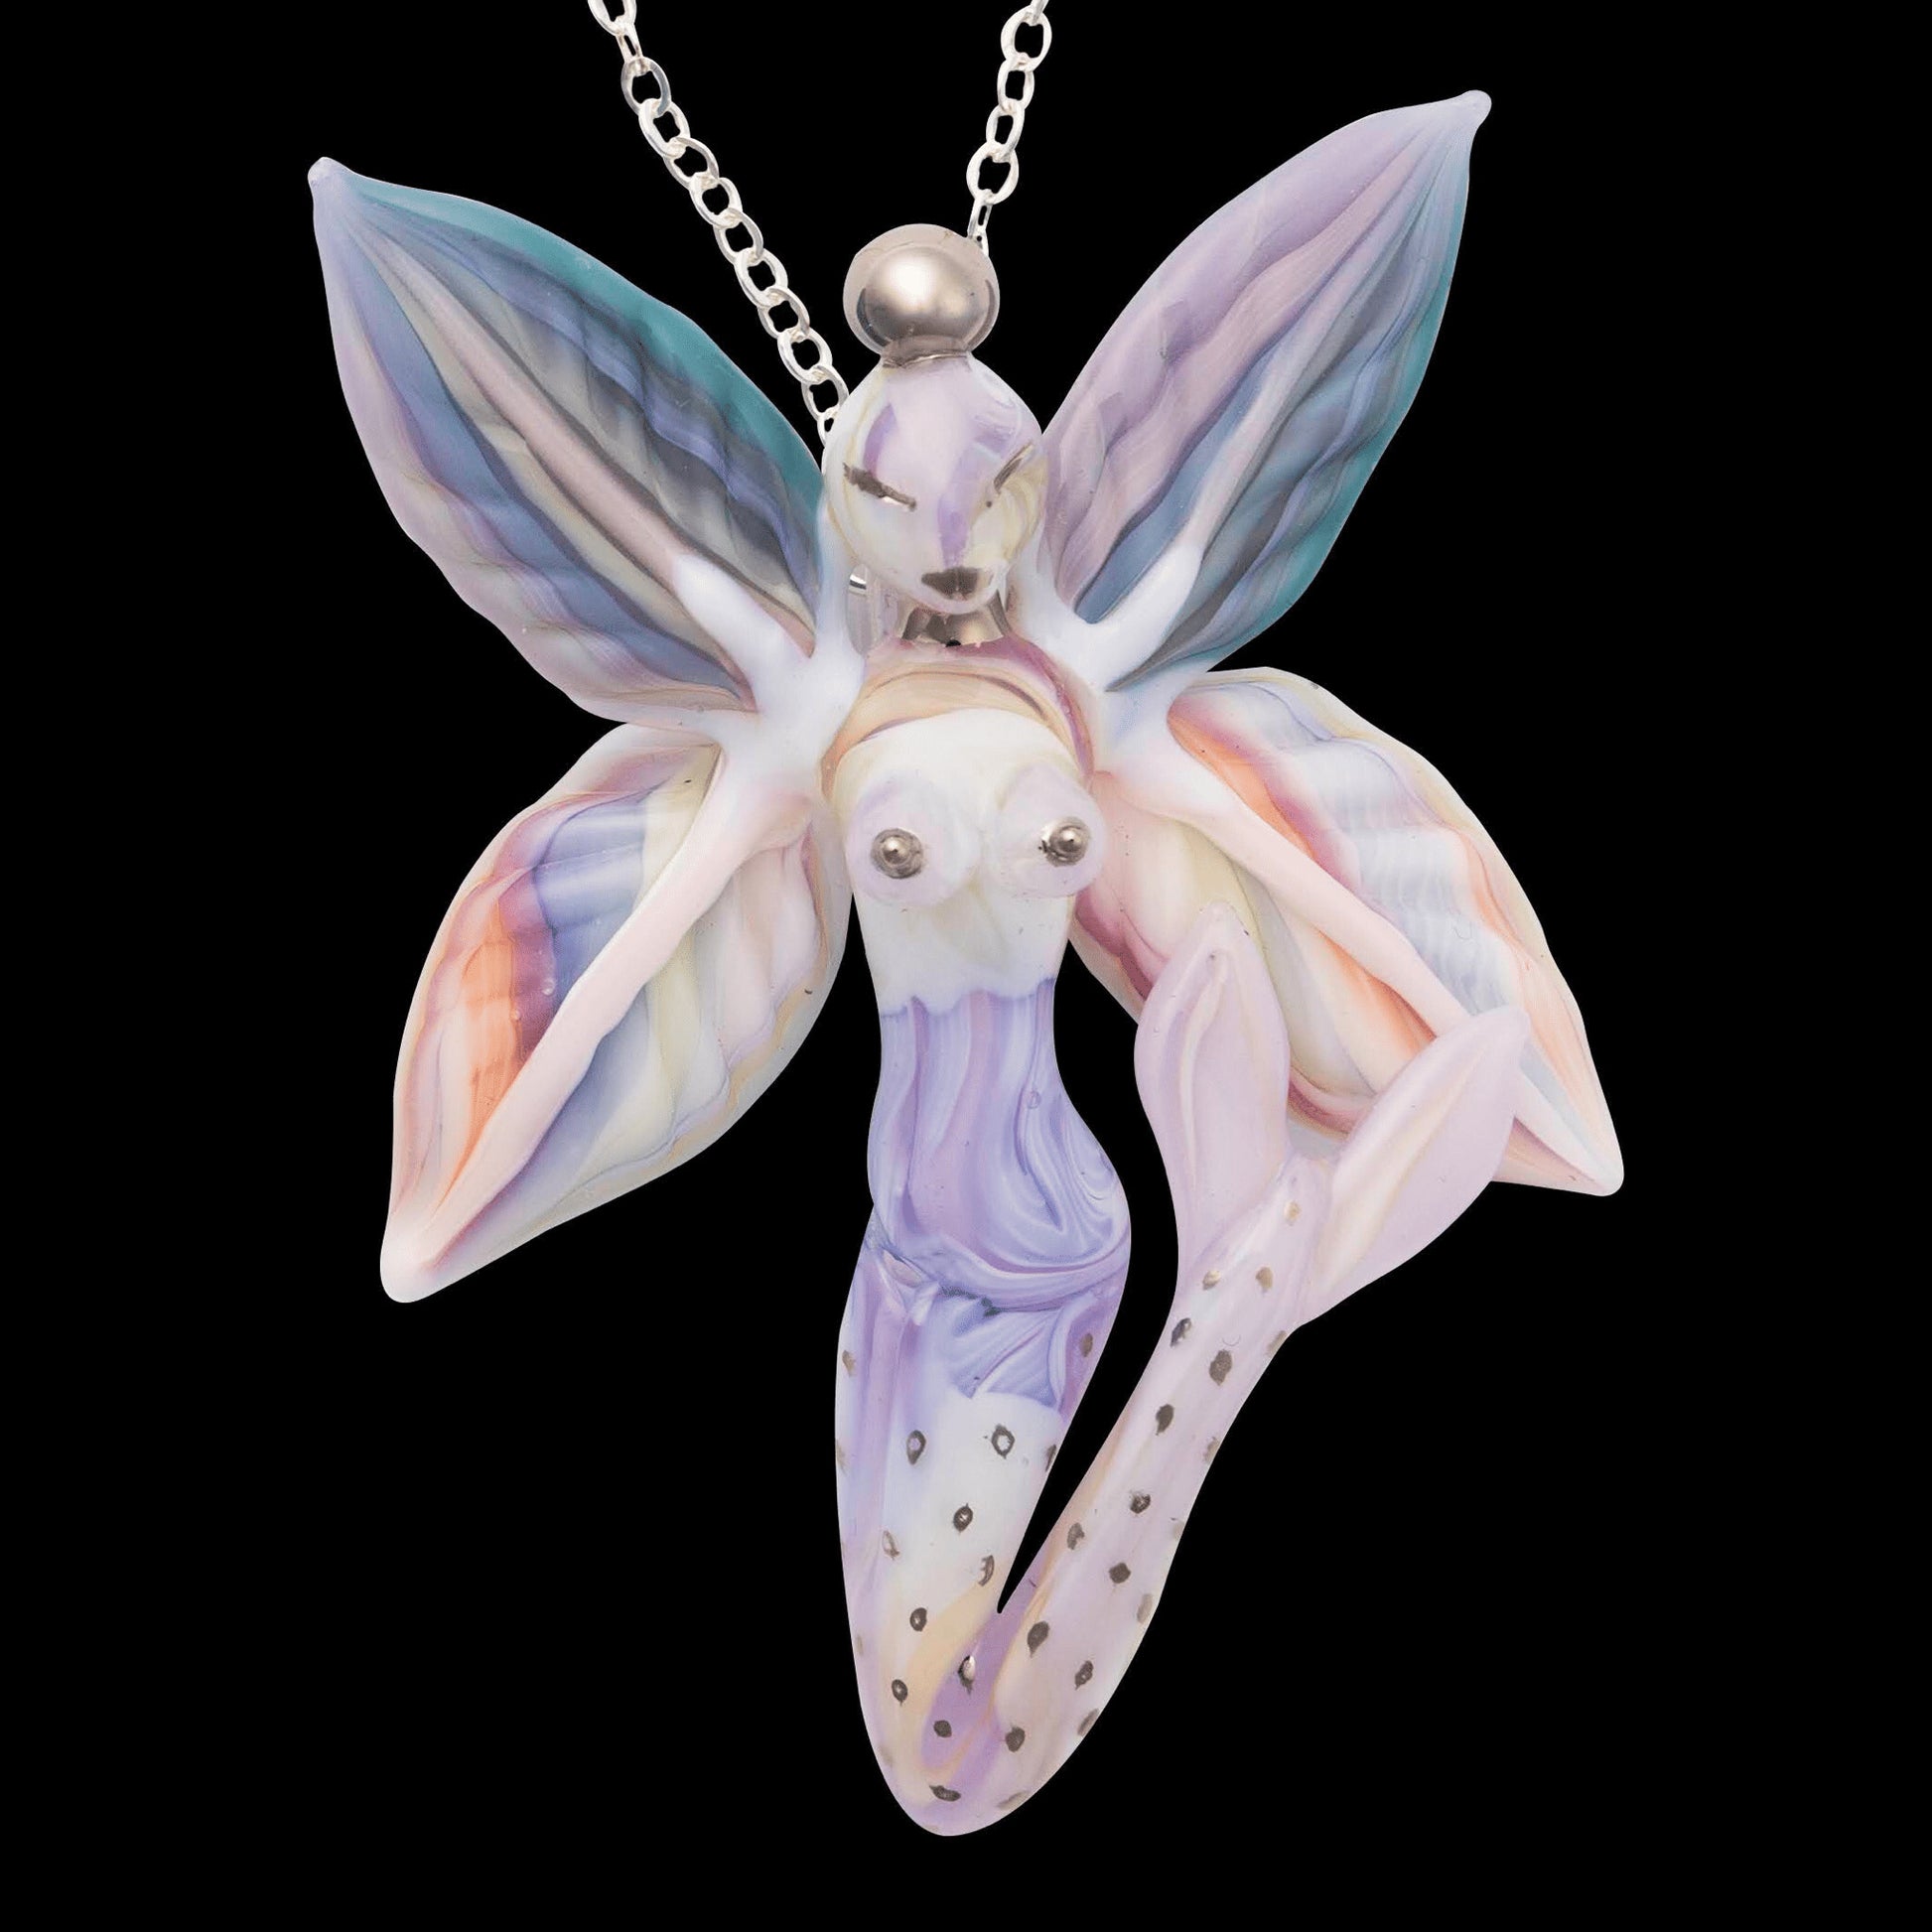 meticulously crafted glass pendant - Fairy Mermaid Pendant by Sibelley x Trip A (Sweater Weather)